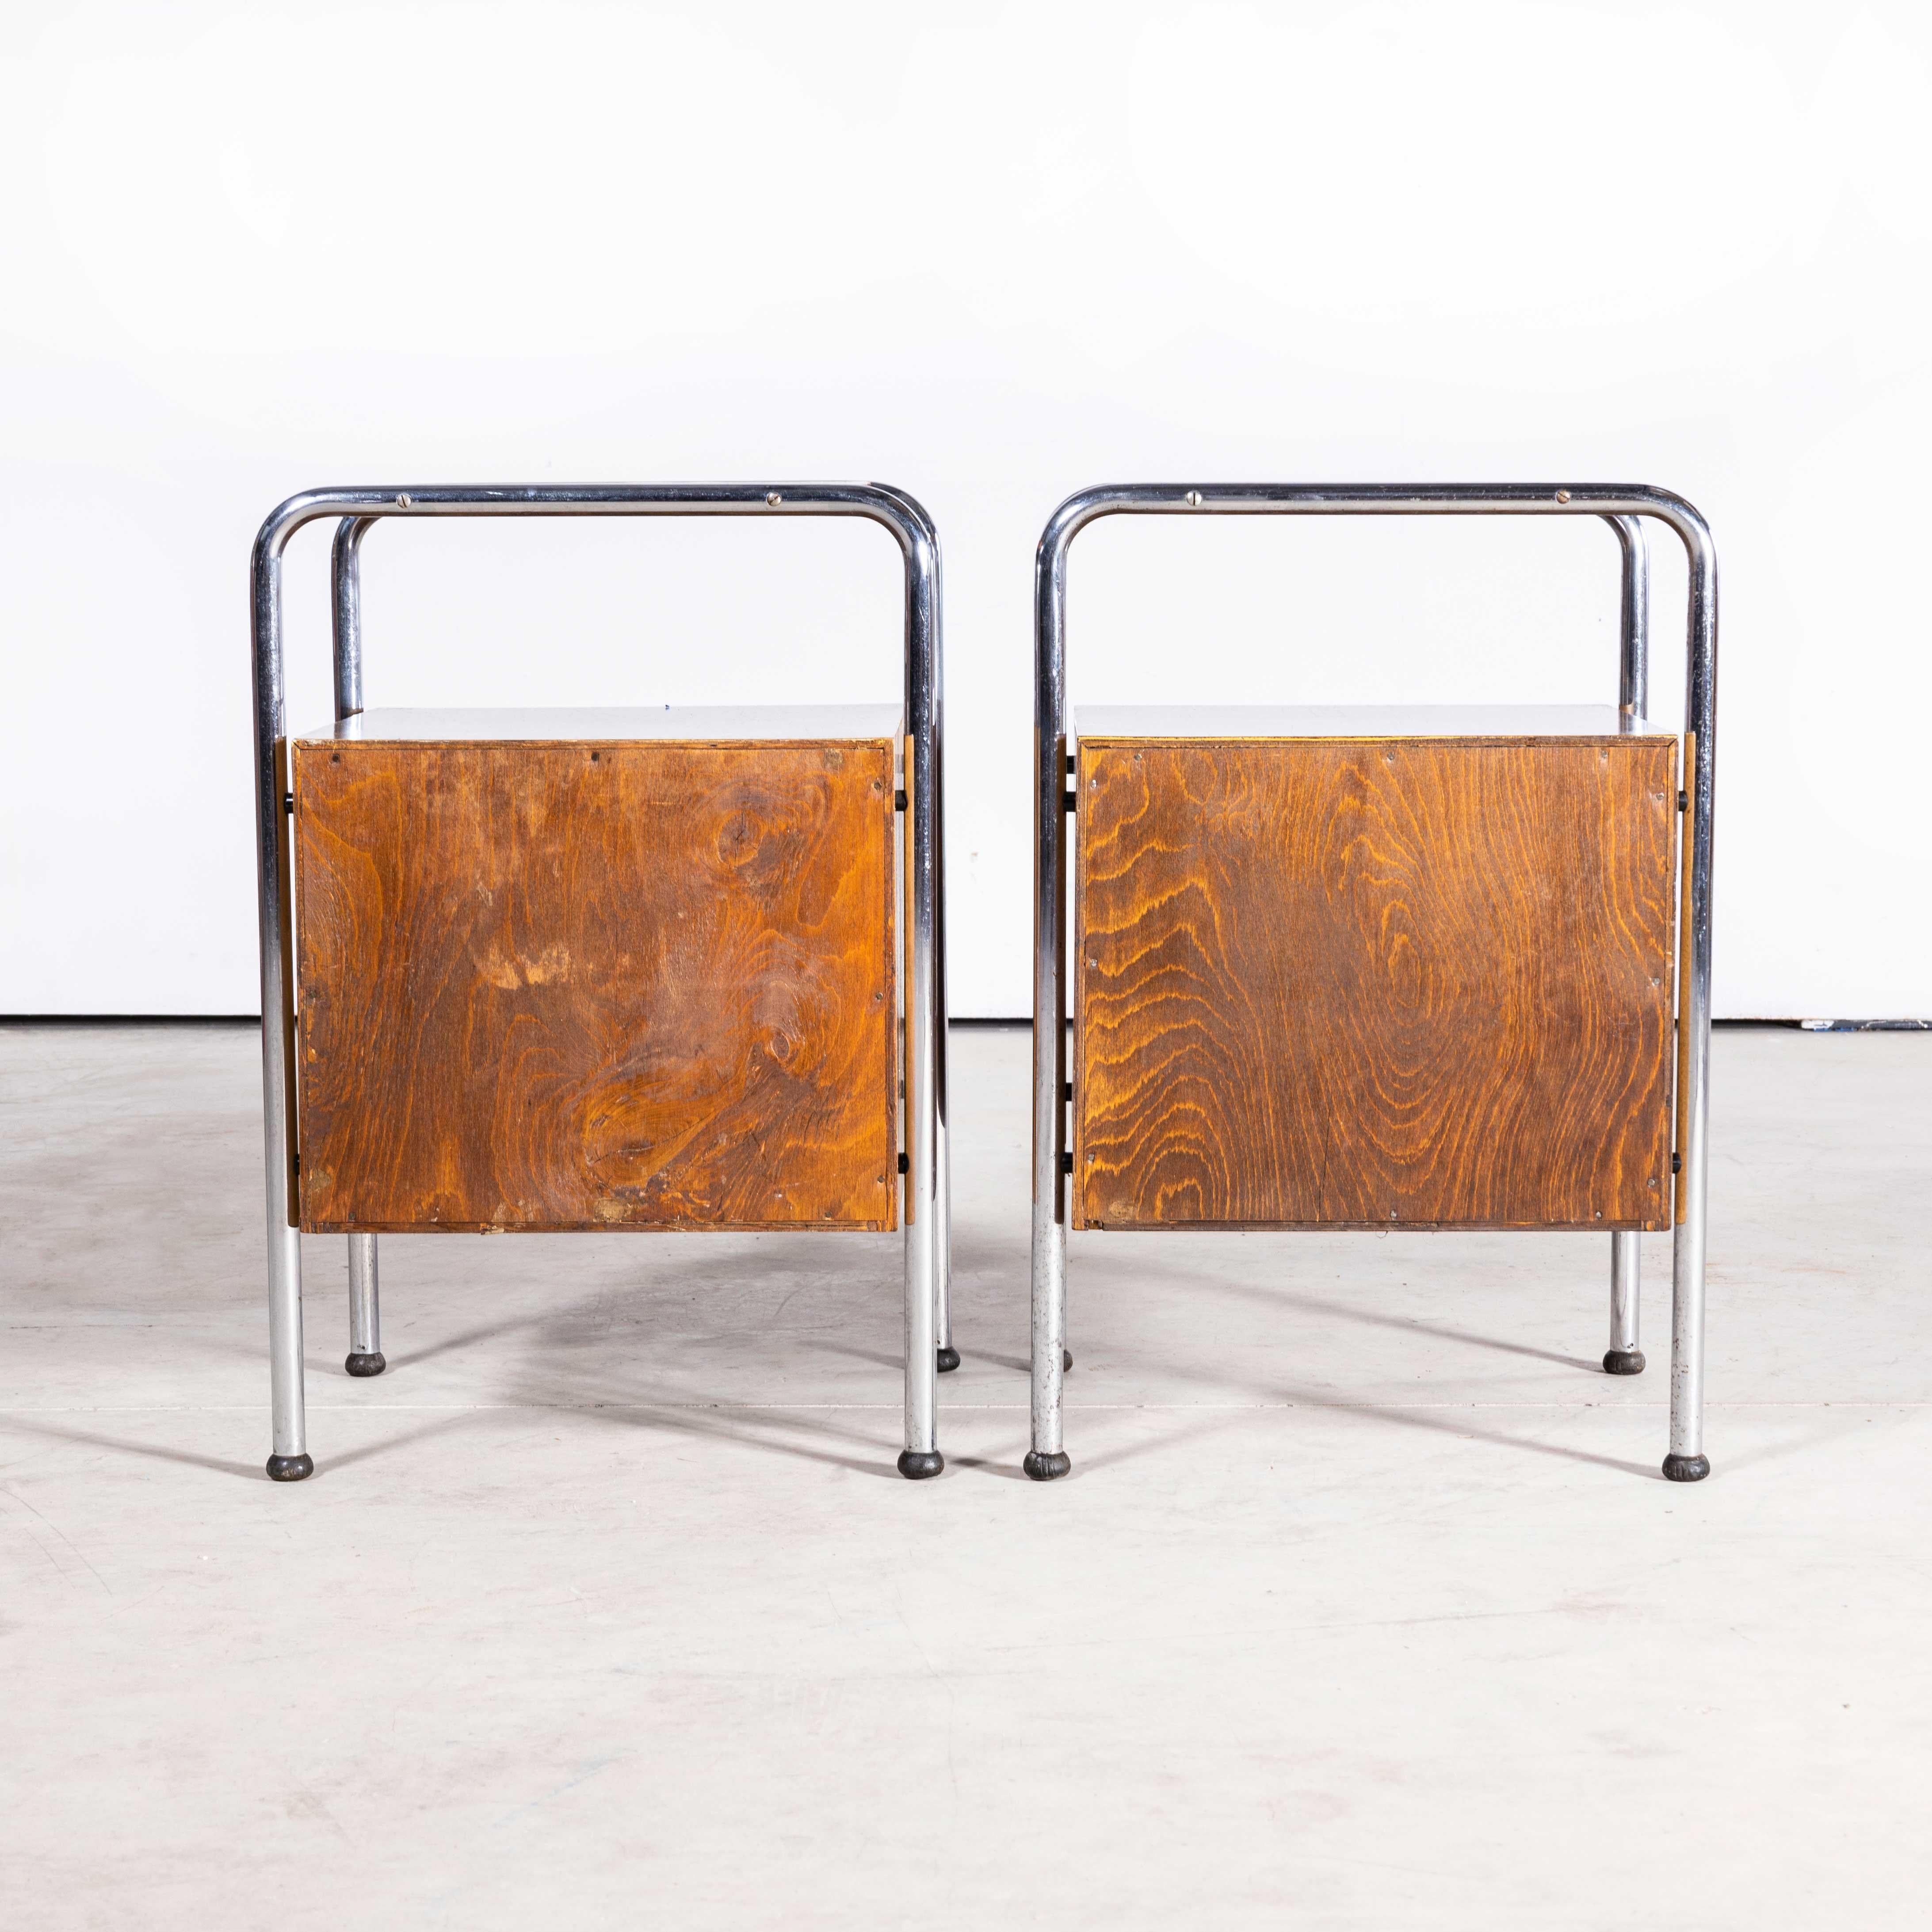 1960s Chrome and Birch Bedside Cabinets, Pair For Sale 2